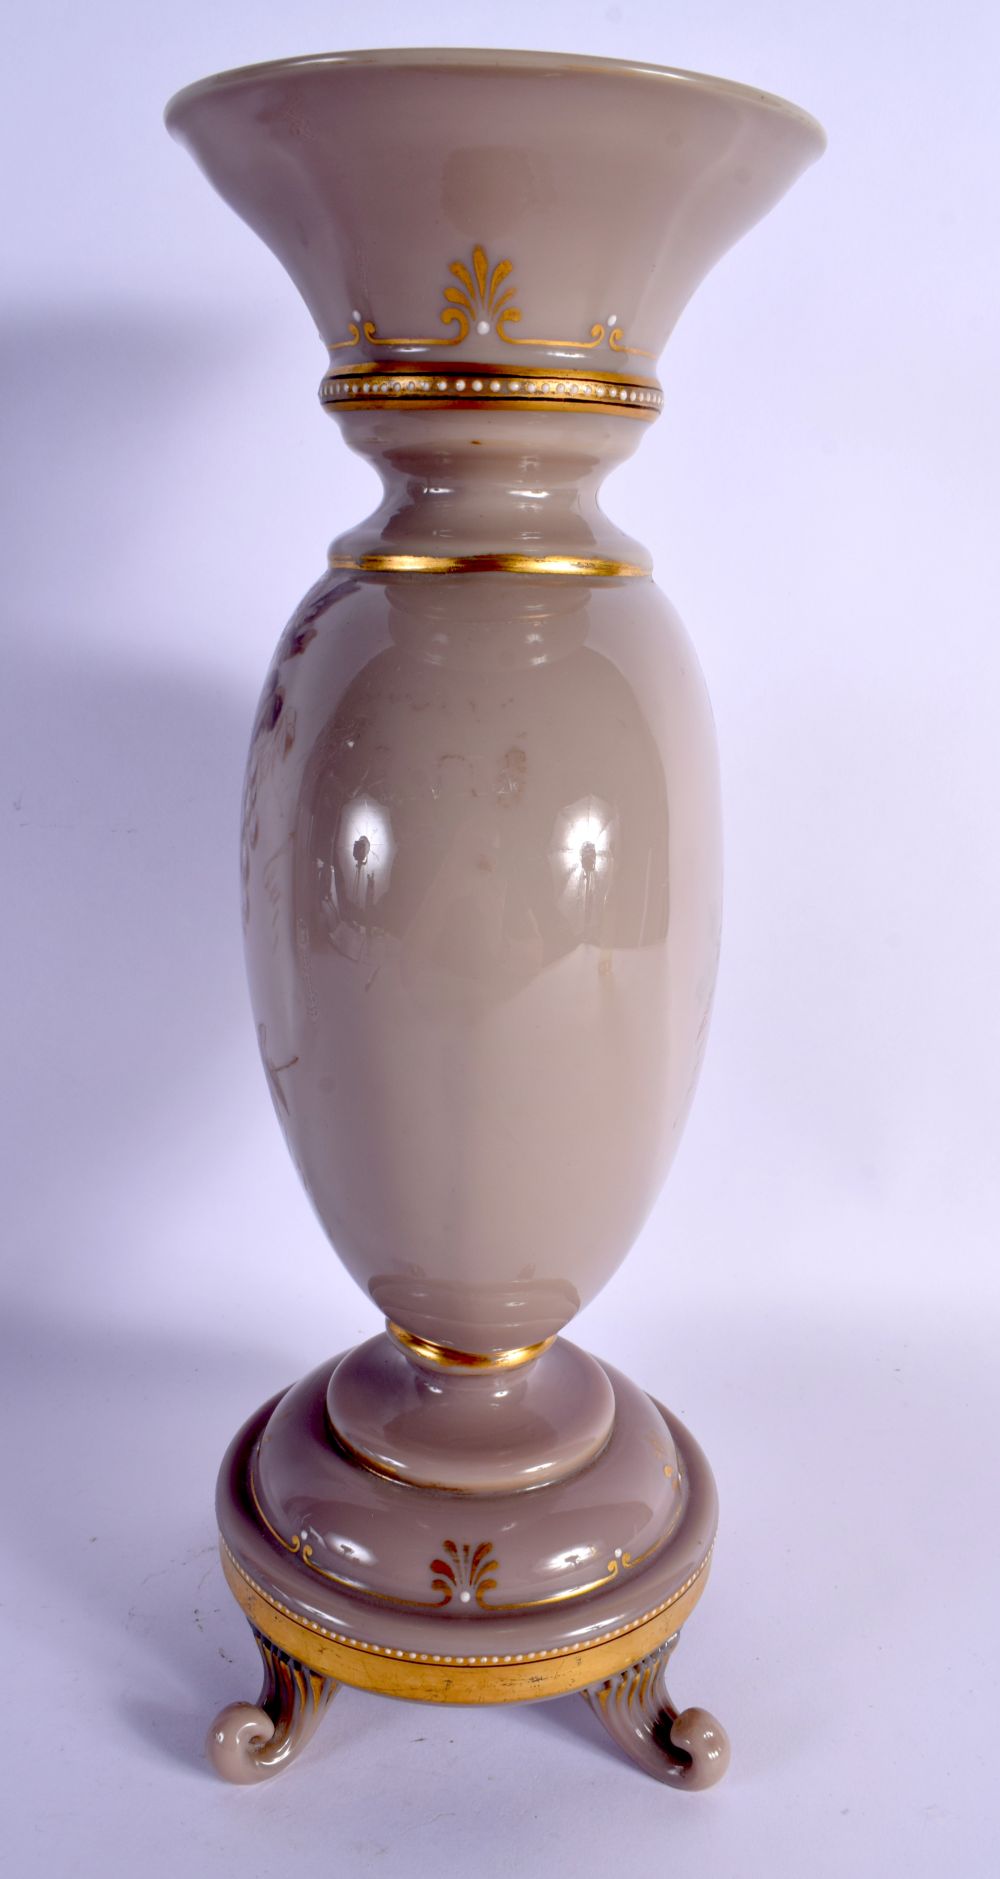 A LARGE LATE VICTORIAN OPALINE GLASS VASE painted with berries and leaves. 36 cm x 15 cm. - Image 2 of 6